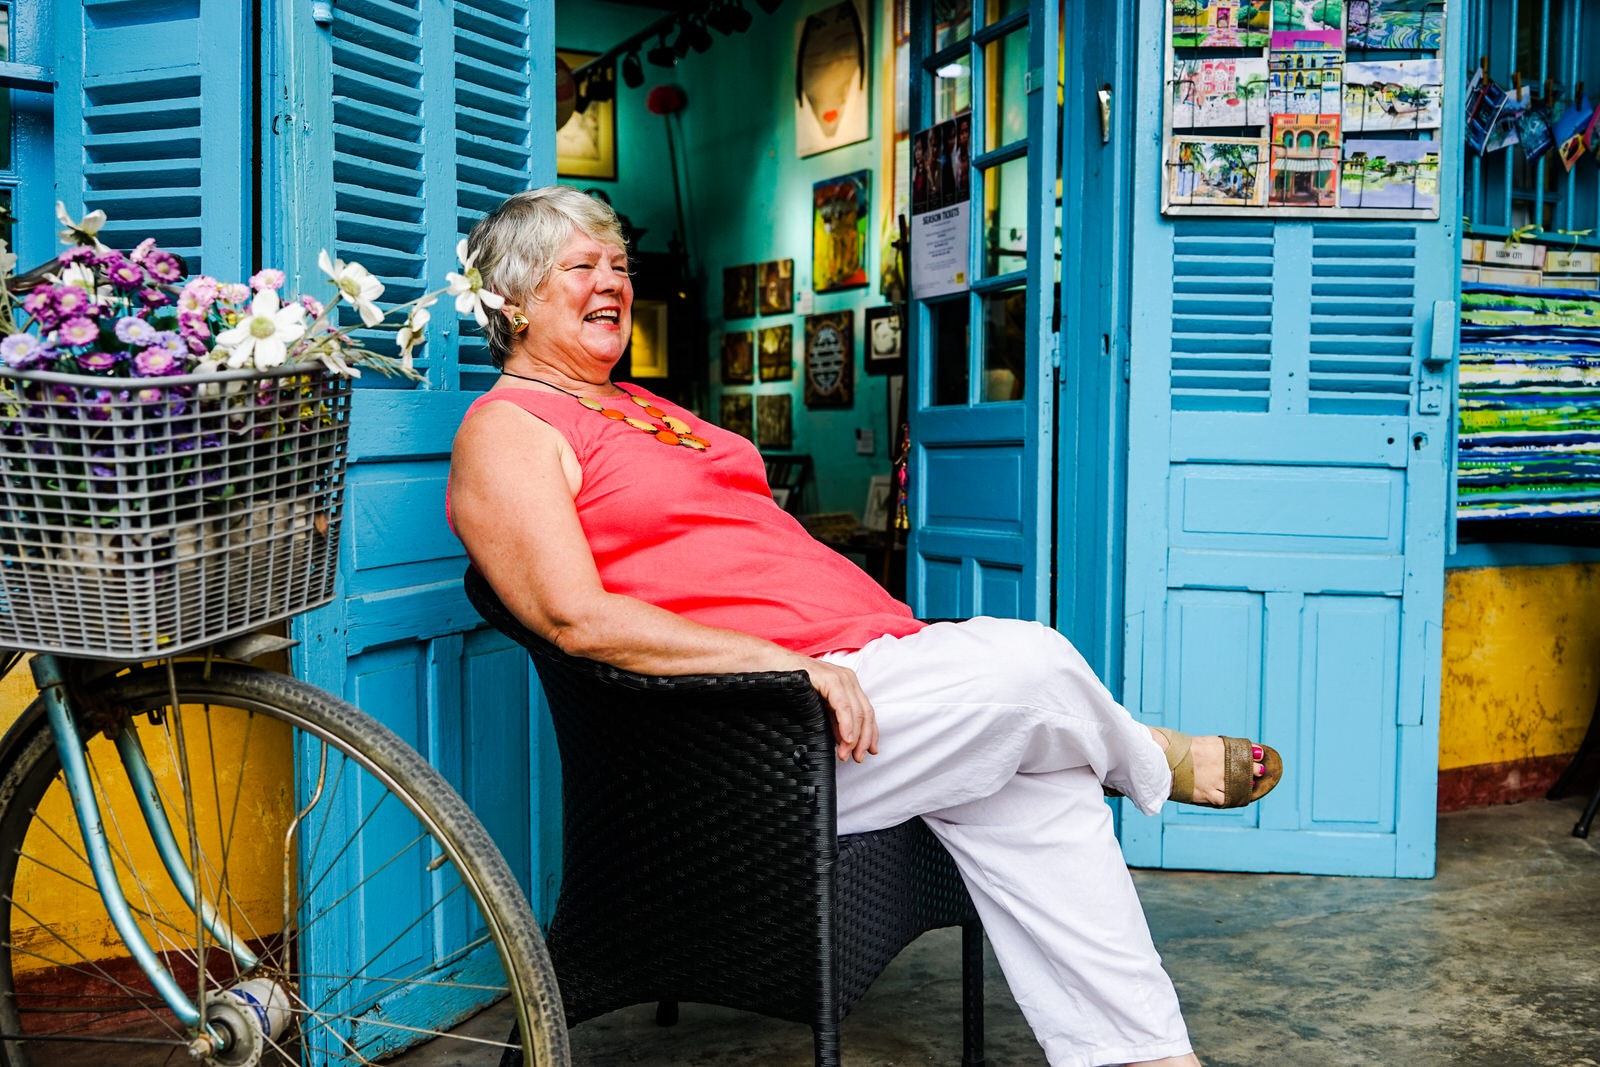 Artist and communicator Bridget March relaxes outside her Hoi An shop